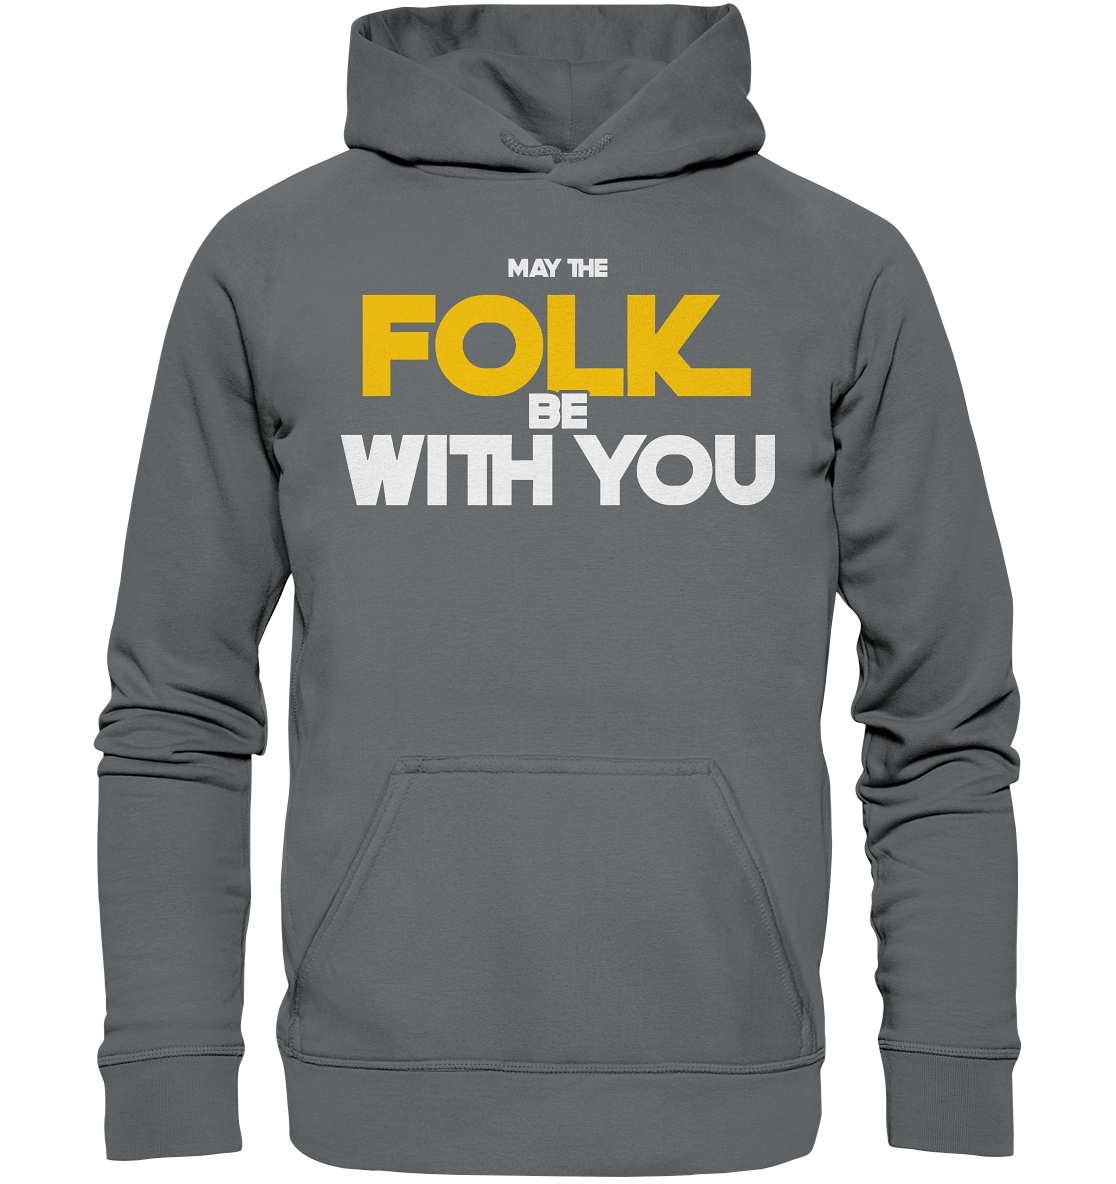 May The Folk Be With You - Basic Unisex Hoodie